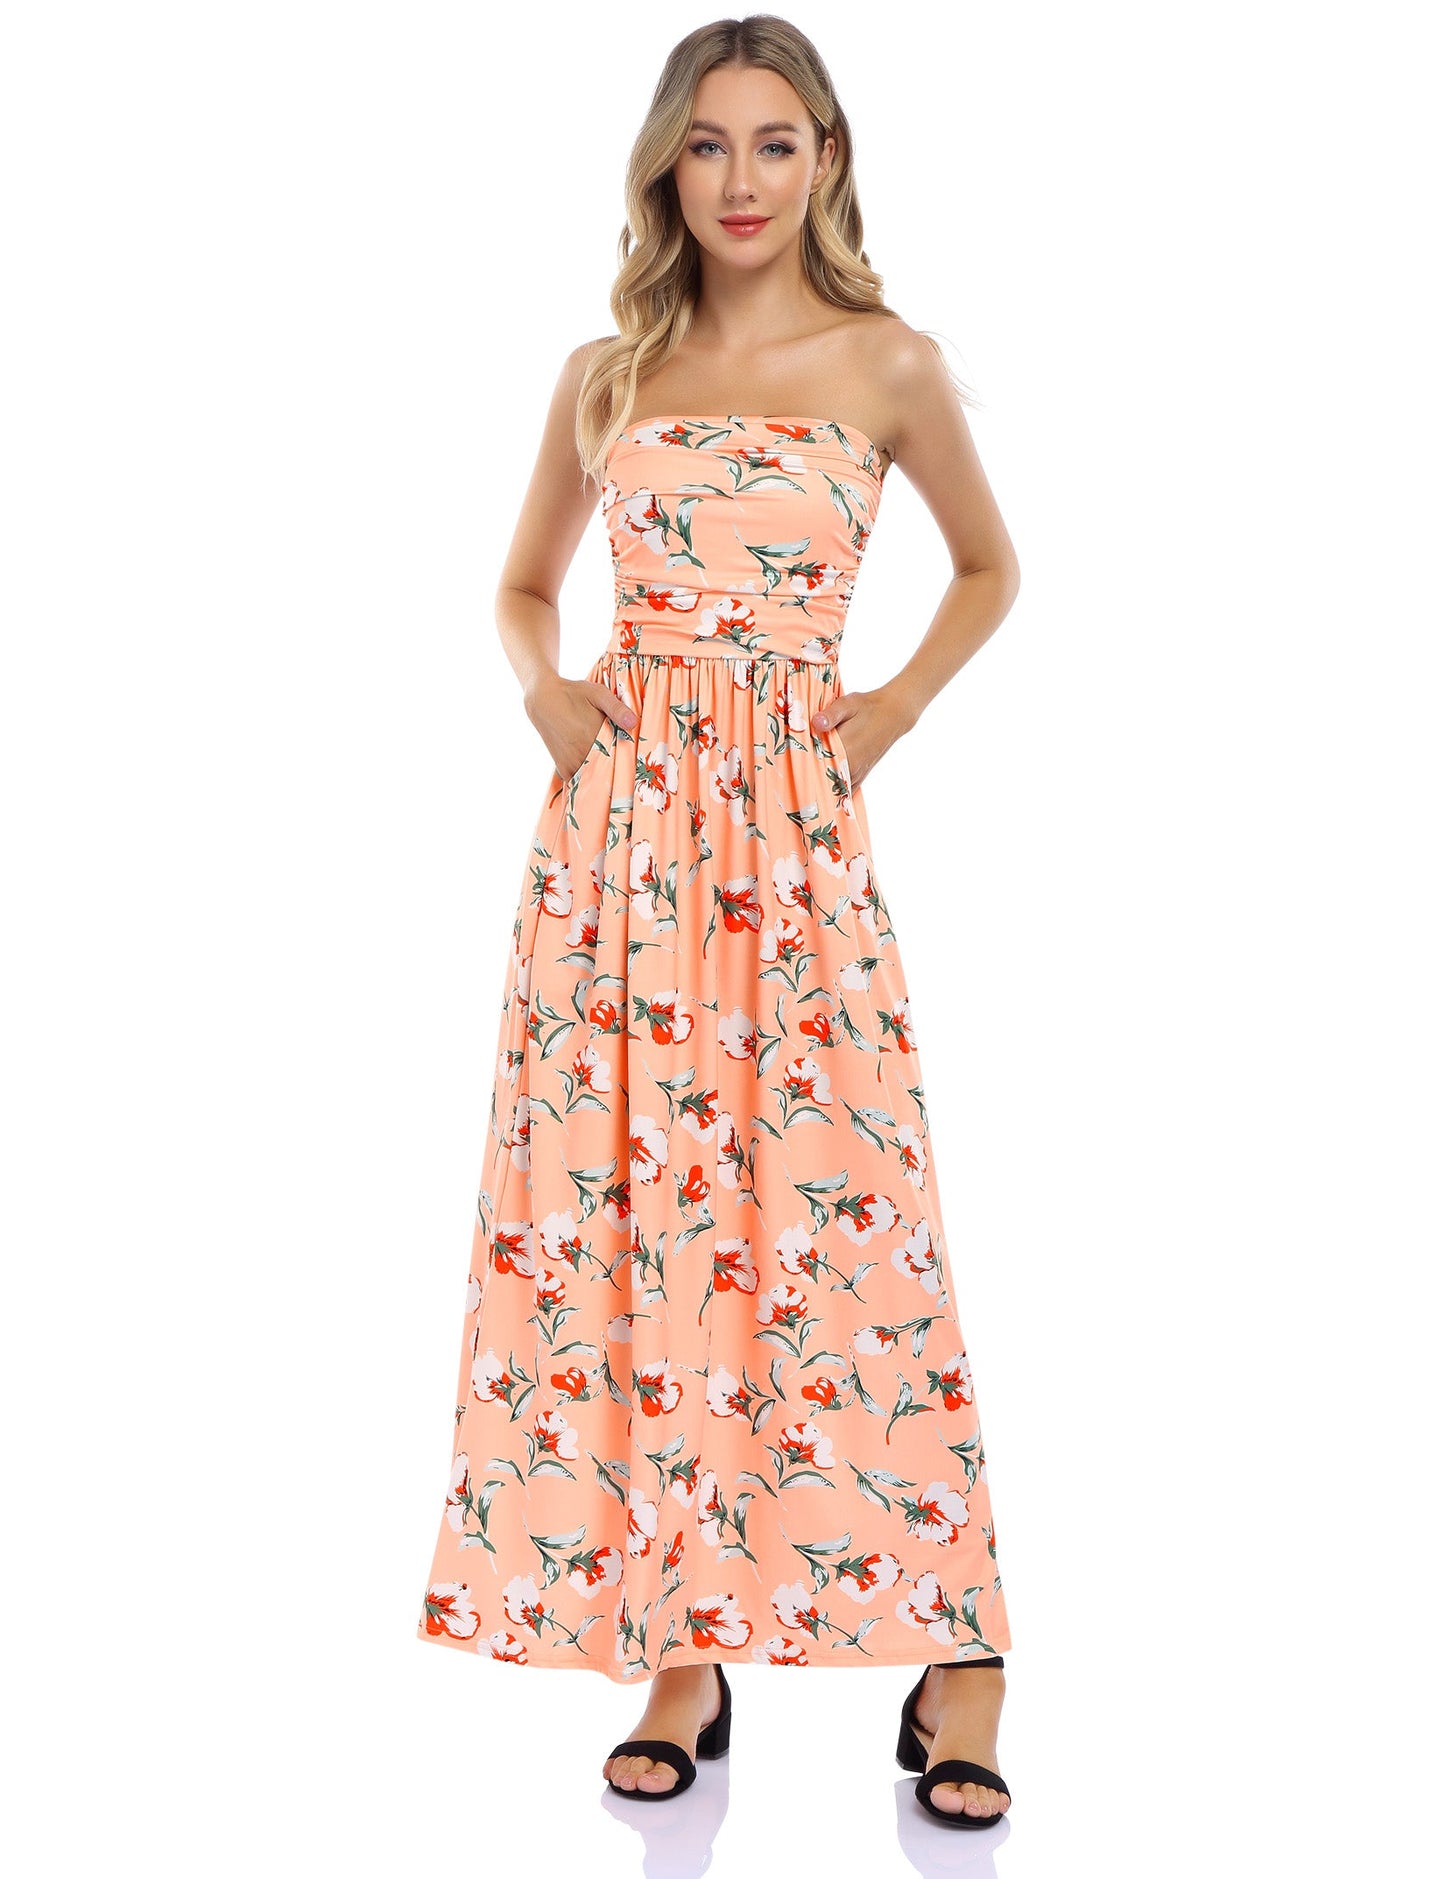 YESFASHION Women's Strapless Graceful Floral Party Maxi Long Dress Floral Blue